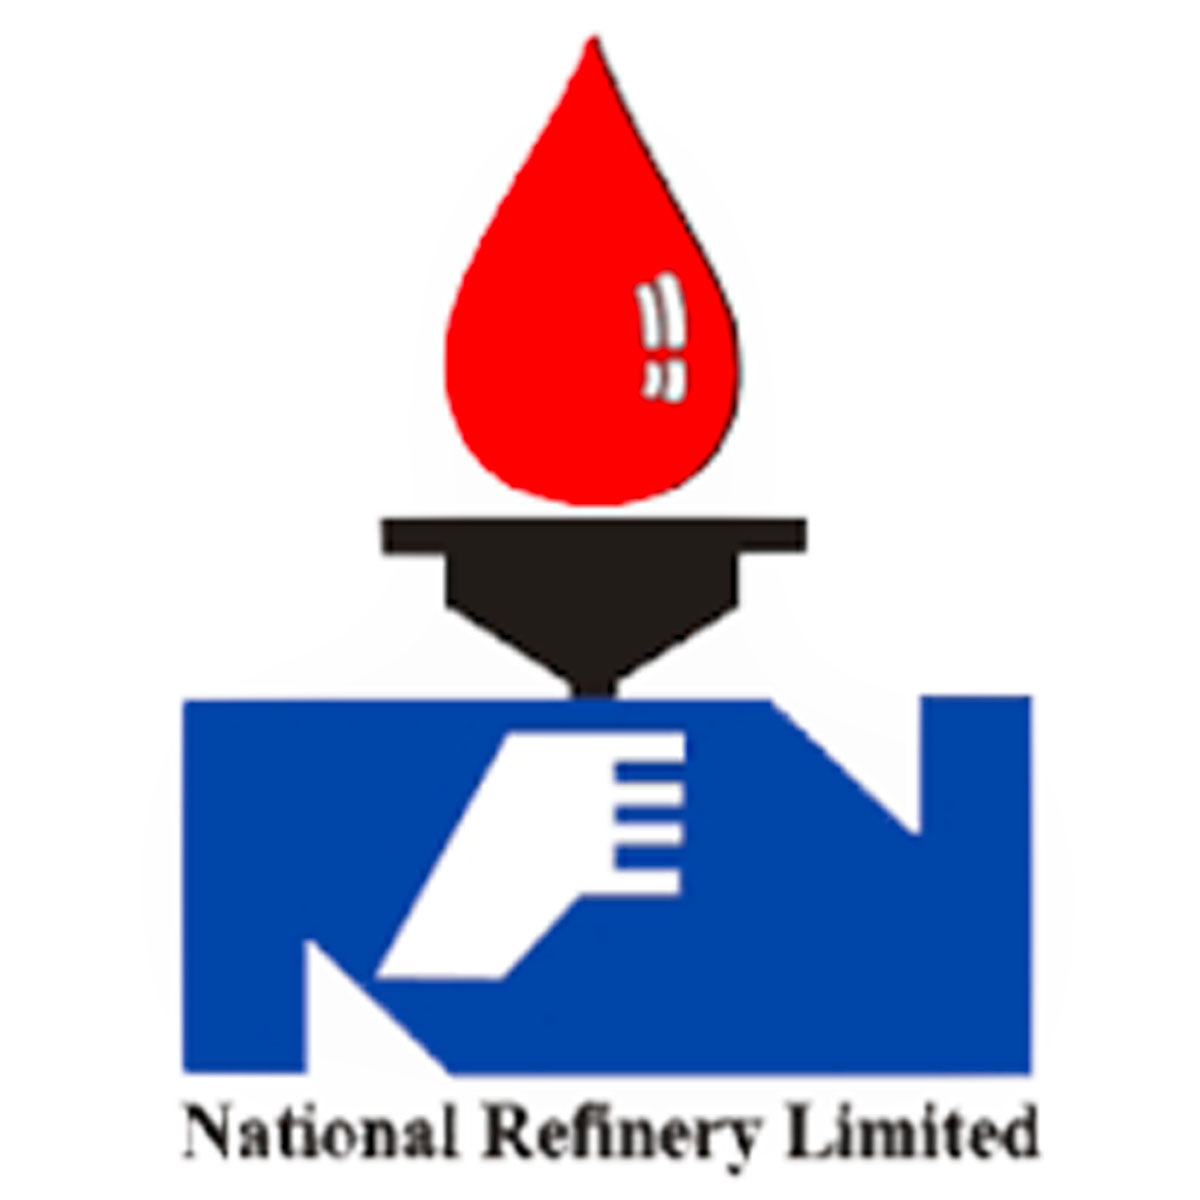 National Refinery Limited: SCAM's Institutional Customer